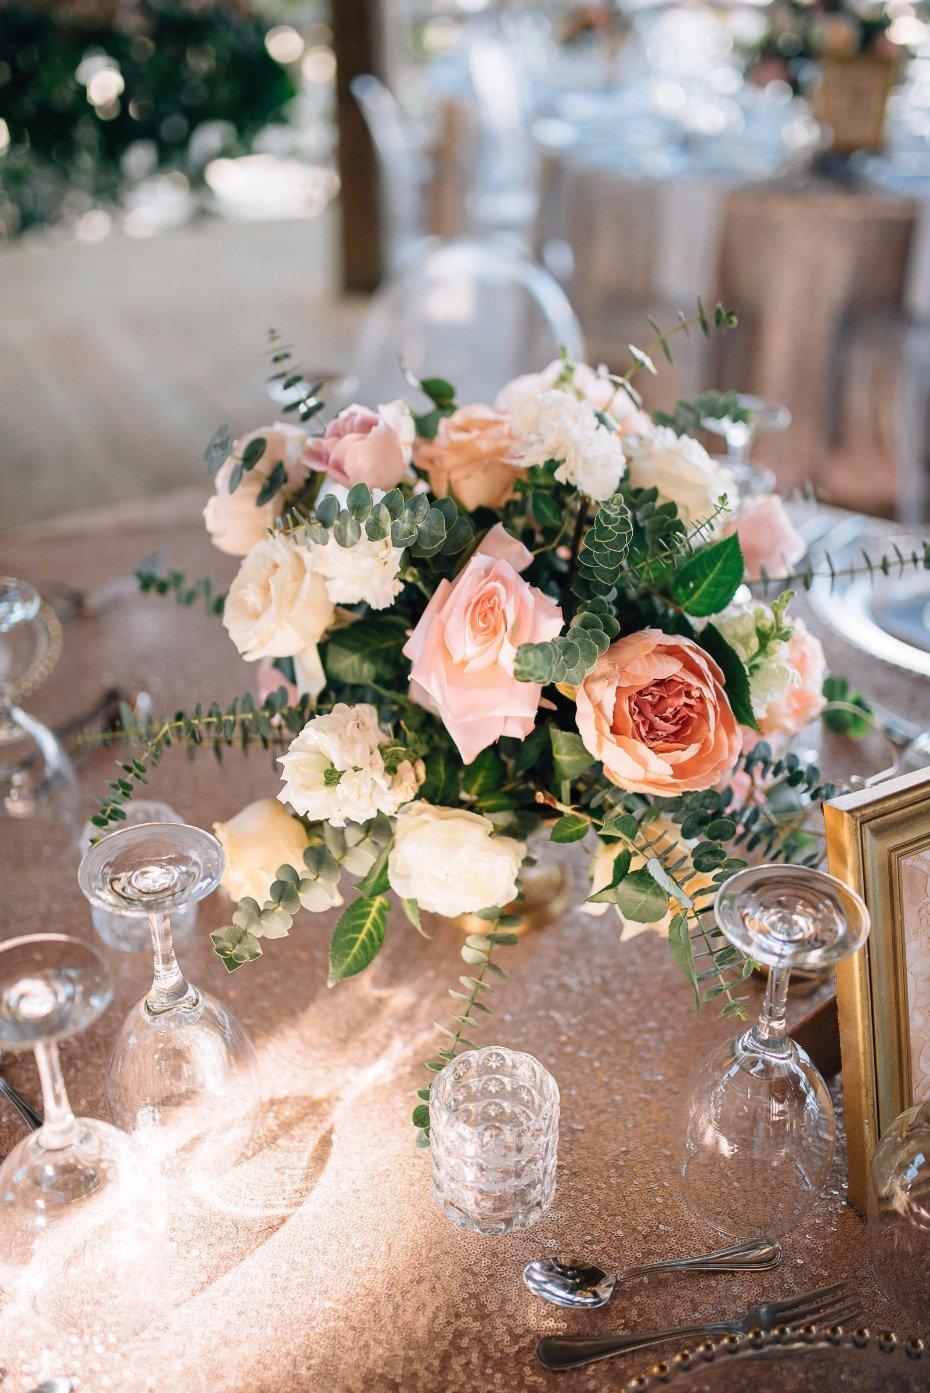 elegant wedding flowers for your table centerpieces